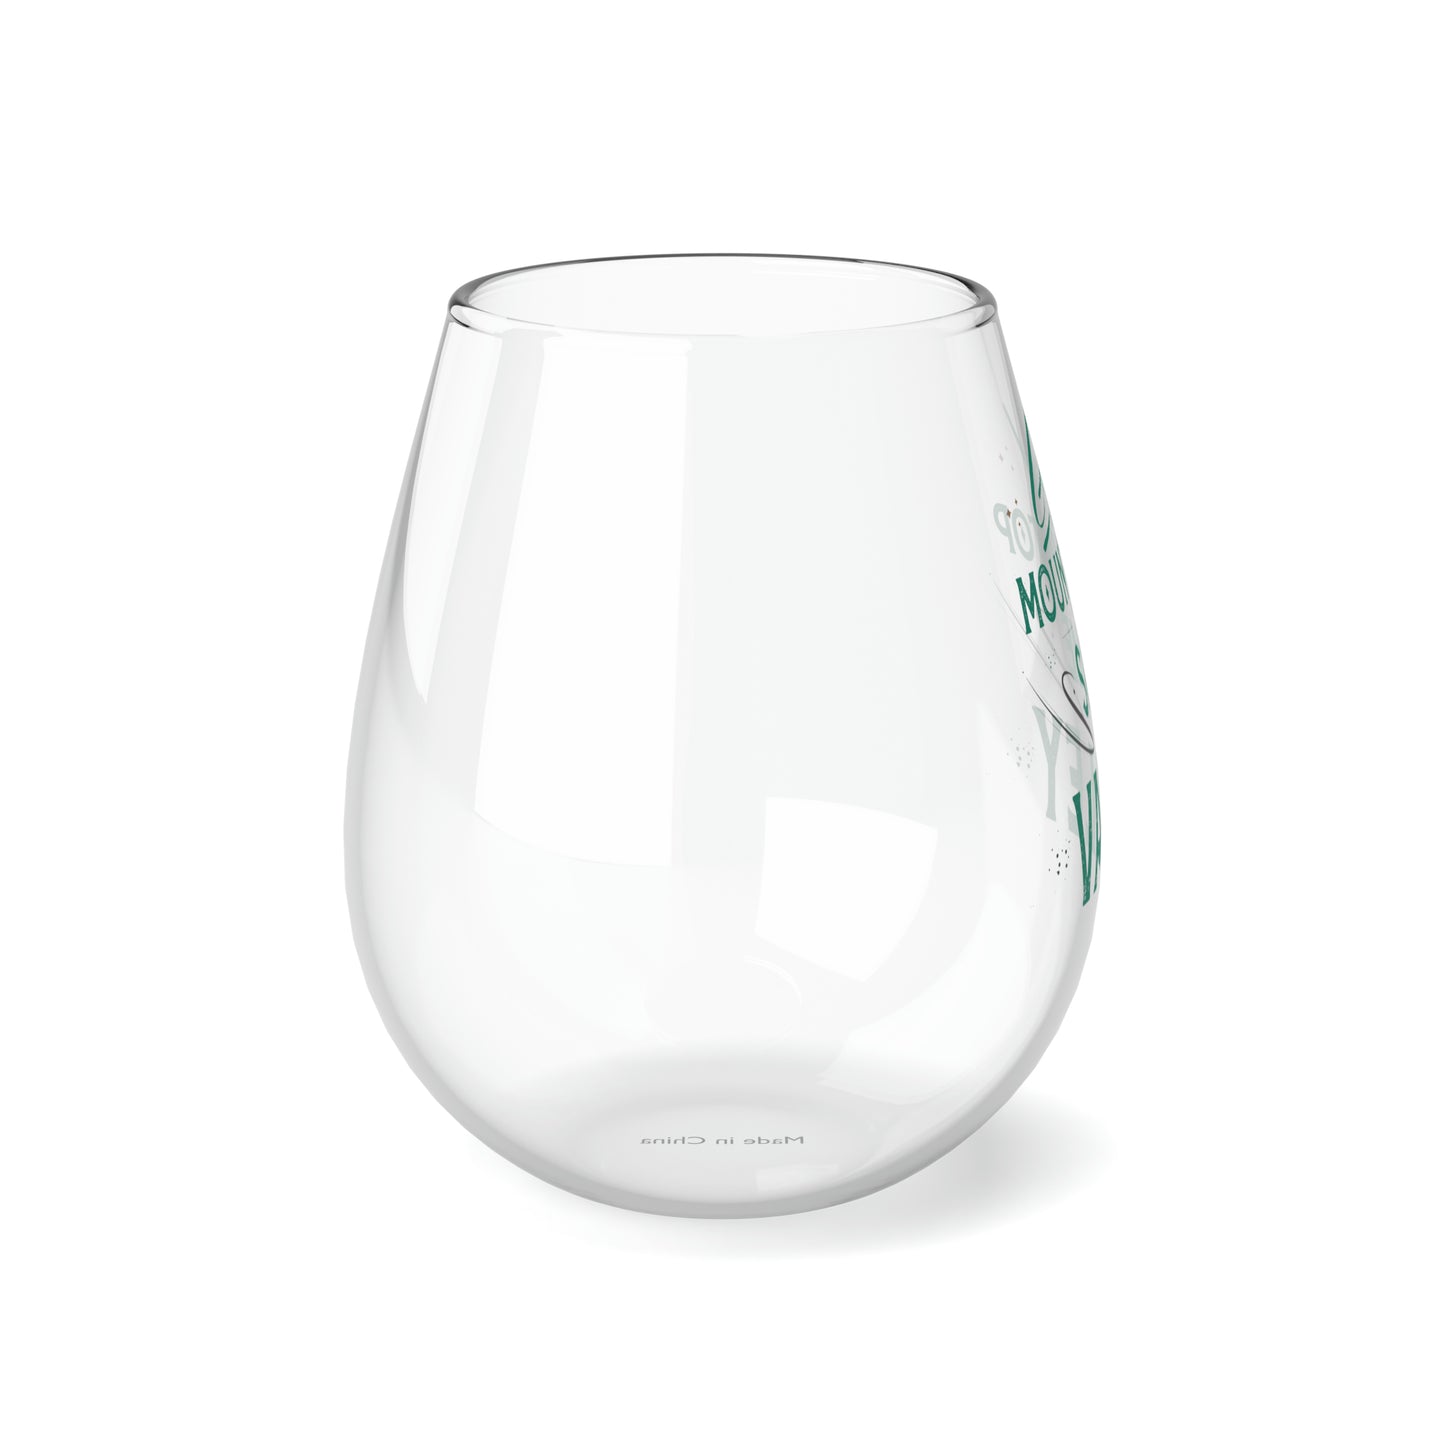 God On The Mountaintop Is The Same In The Valley Stemless Wine Glass, 11.75oz